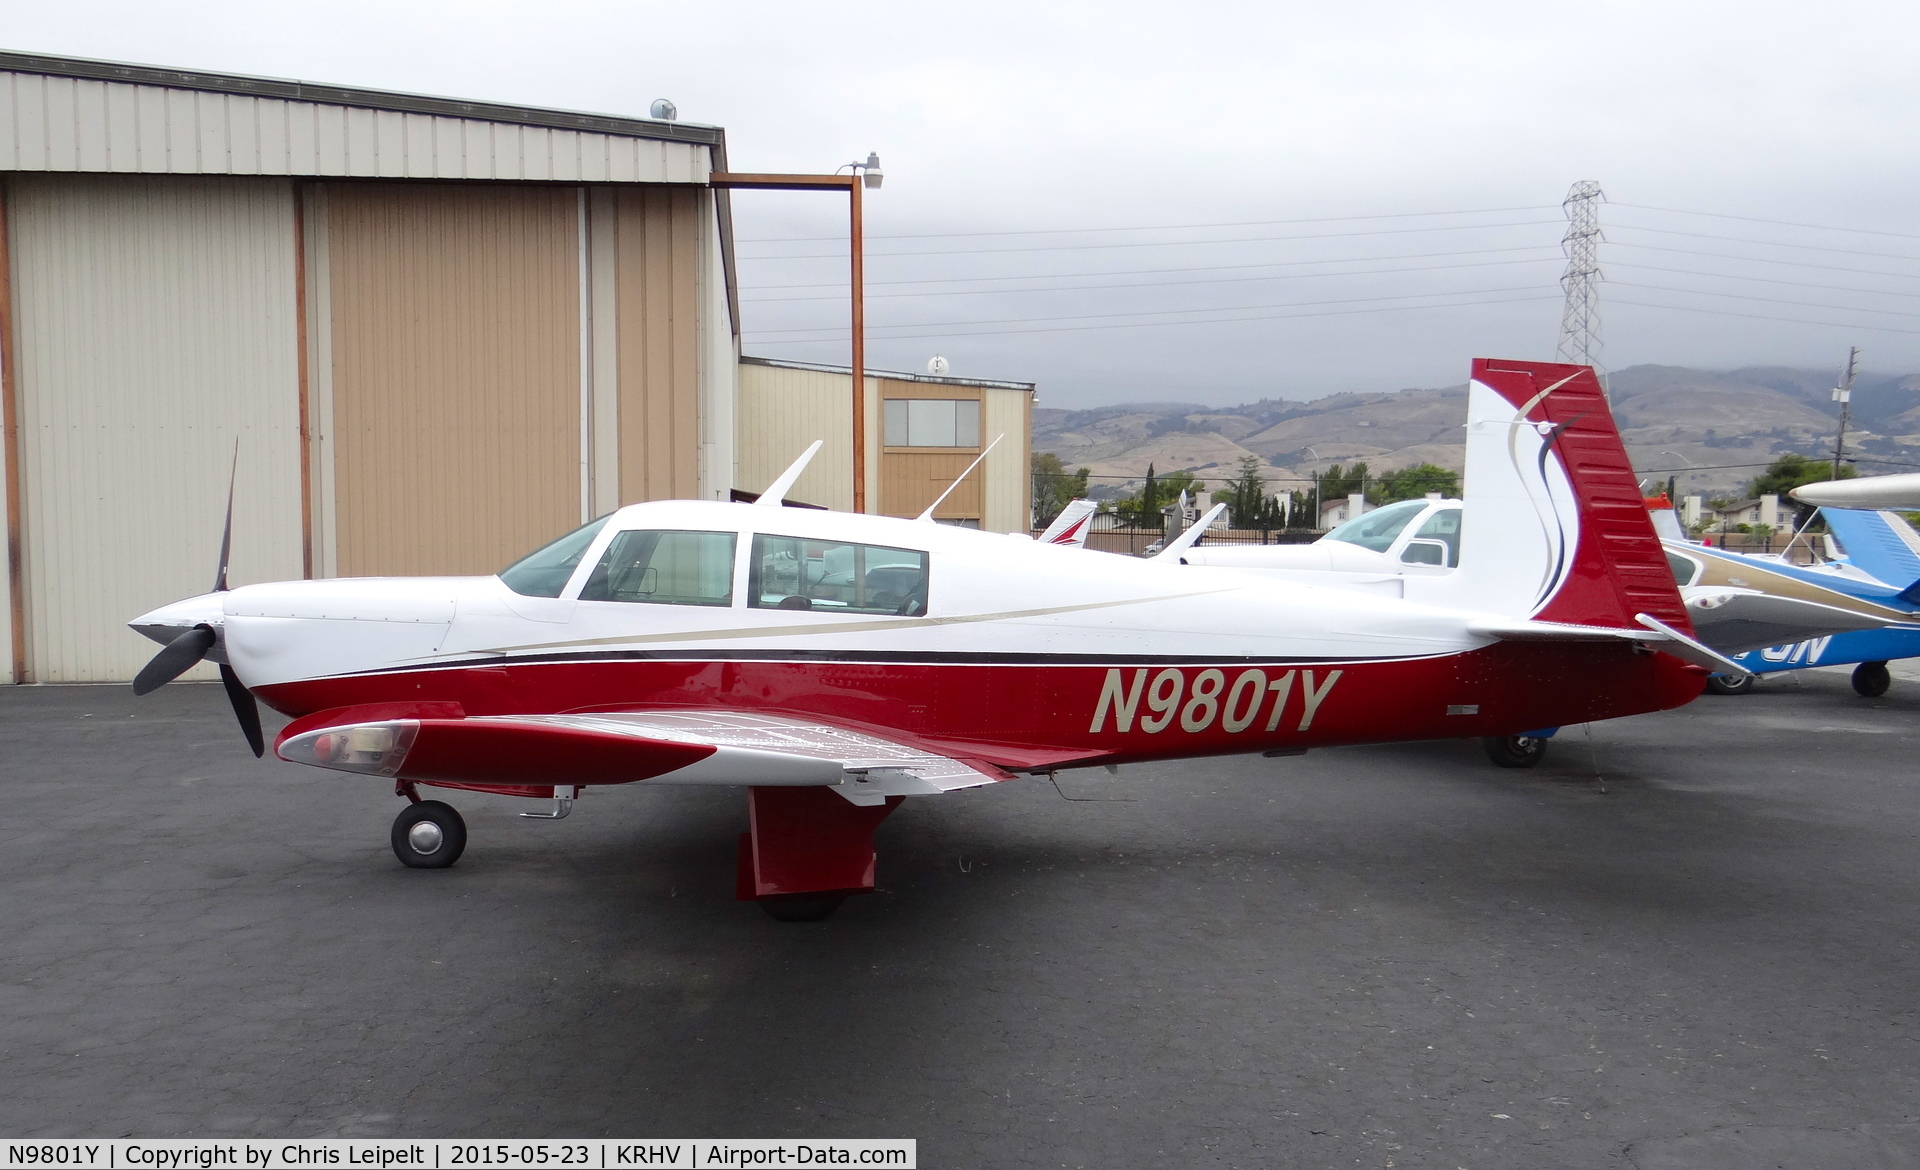 N9801Y, 1981 Mooney M20K C/N 25-0526, Locally-based 1981 Mooney M20K parked in front of the Lafferty Aircraft Sales hangar at Reid Hillview Airport, San Jose, CA.